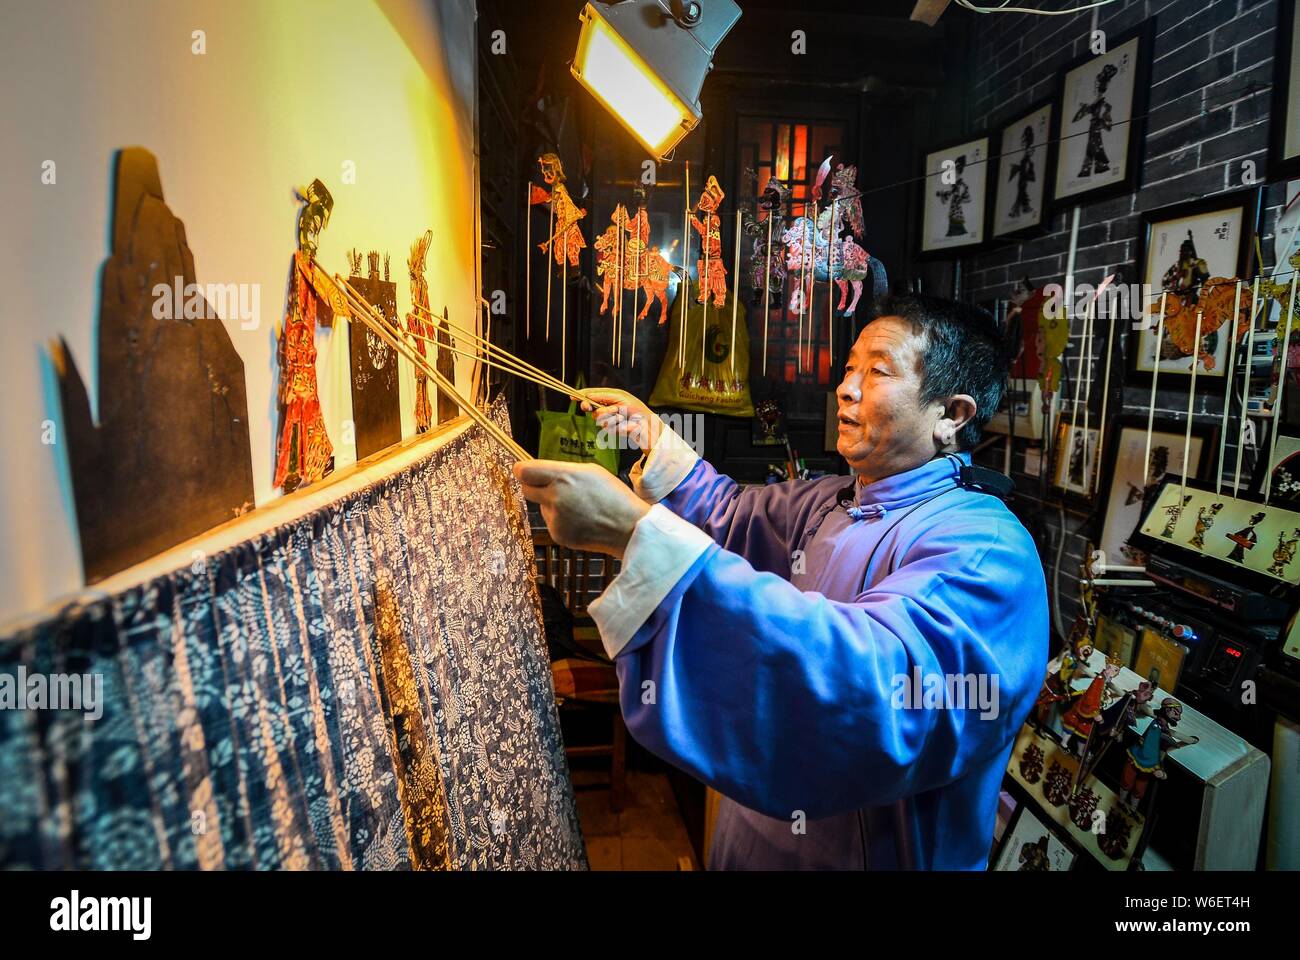 60-year-old Chinese folk artist Chen Shouke performs shadow play or shadow puppetry, also known as shadow puppet, in Tai'erzhuang district, Zaozhuang Stock Photo